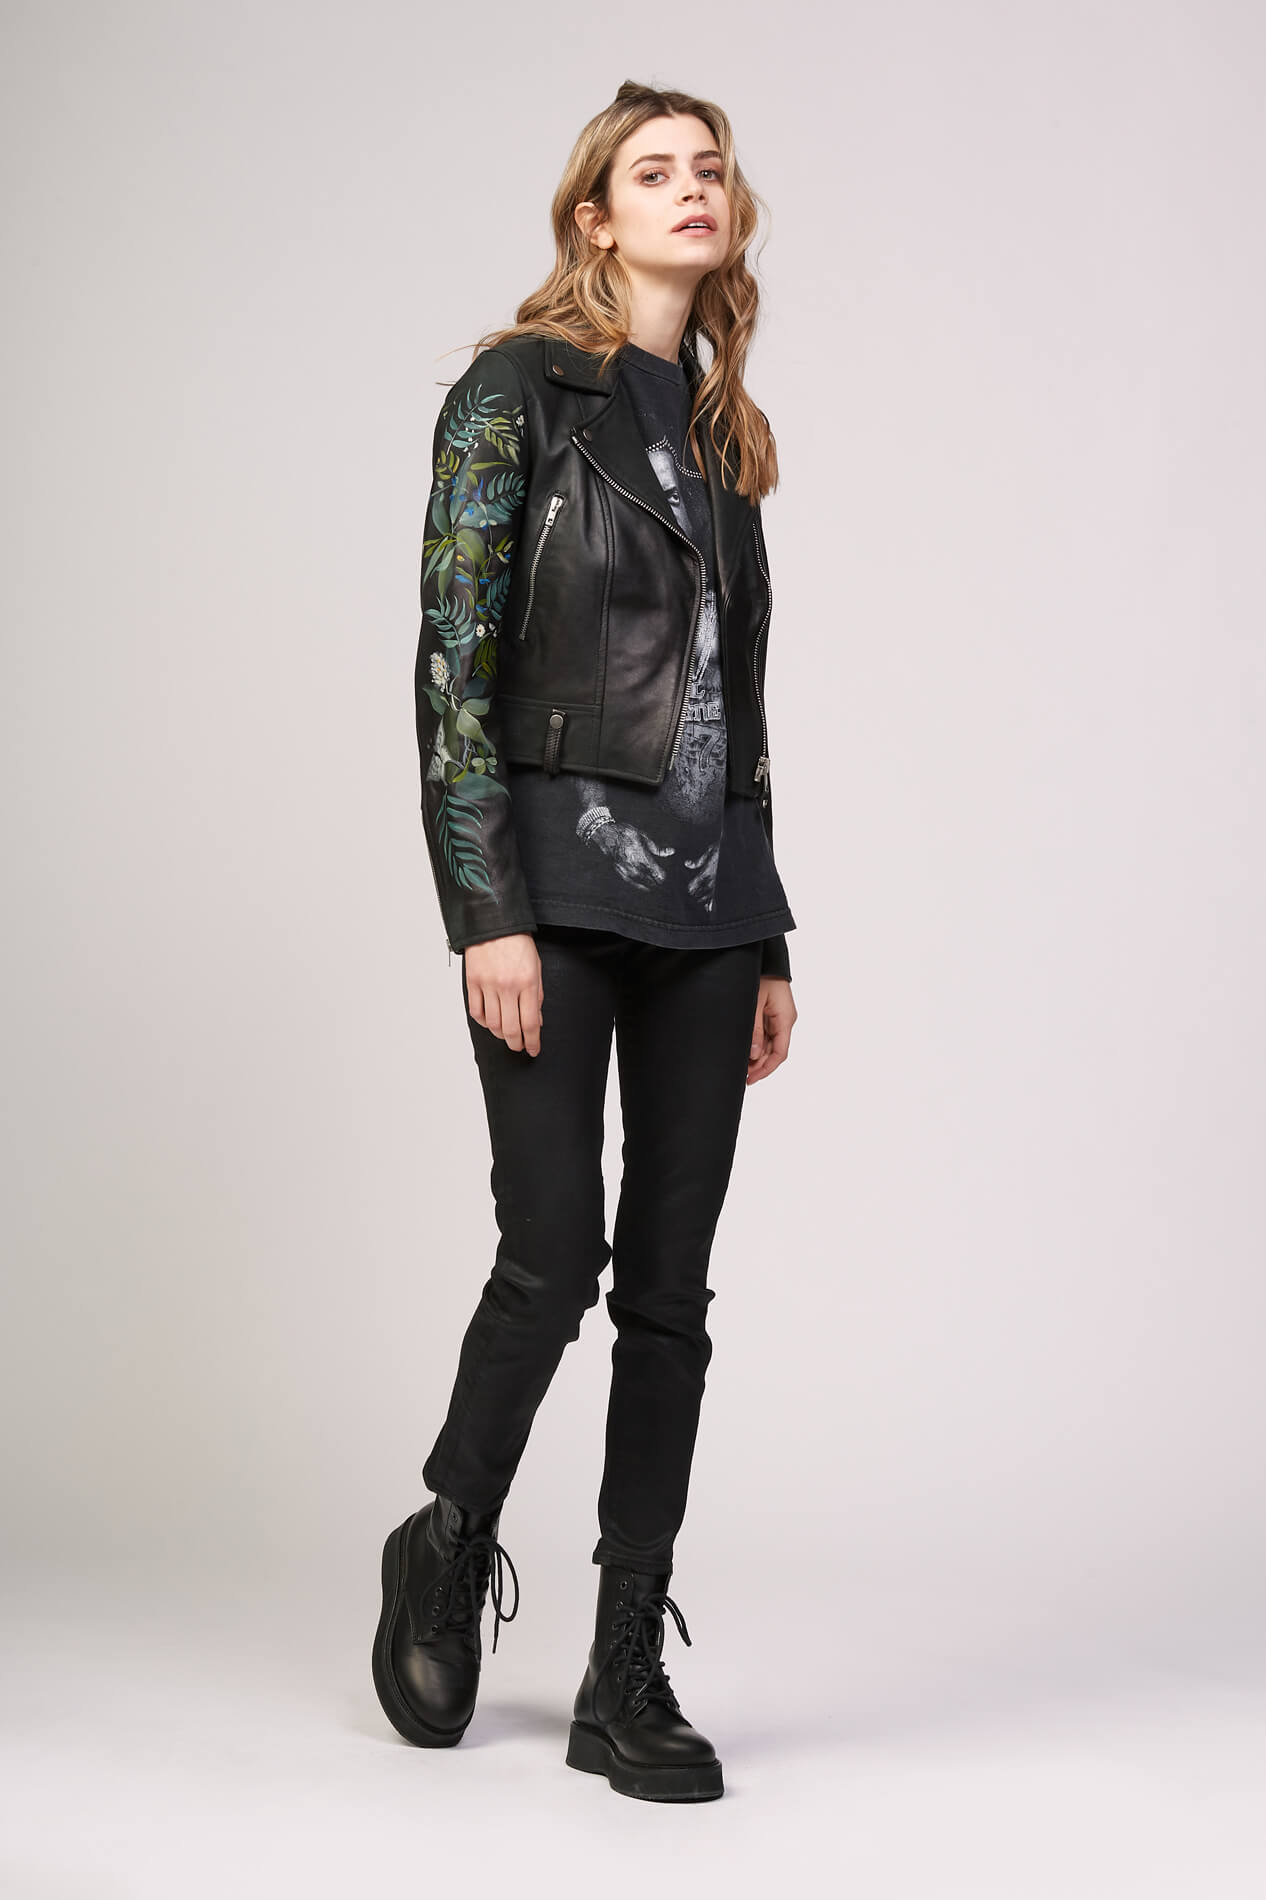 LOU FLOWERS PERFECTO Black leather perfecto with hand painted floral detail on sleeves and back. Asymmetric frontal zip closure. 2 zipped pockets. 100% sheepskin. Made in Italy. HTC LOS ANGELES